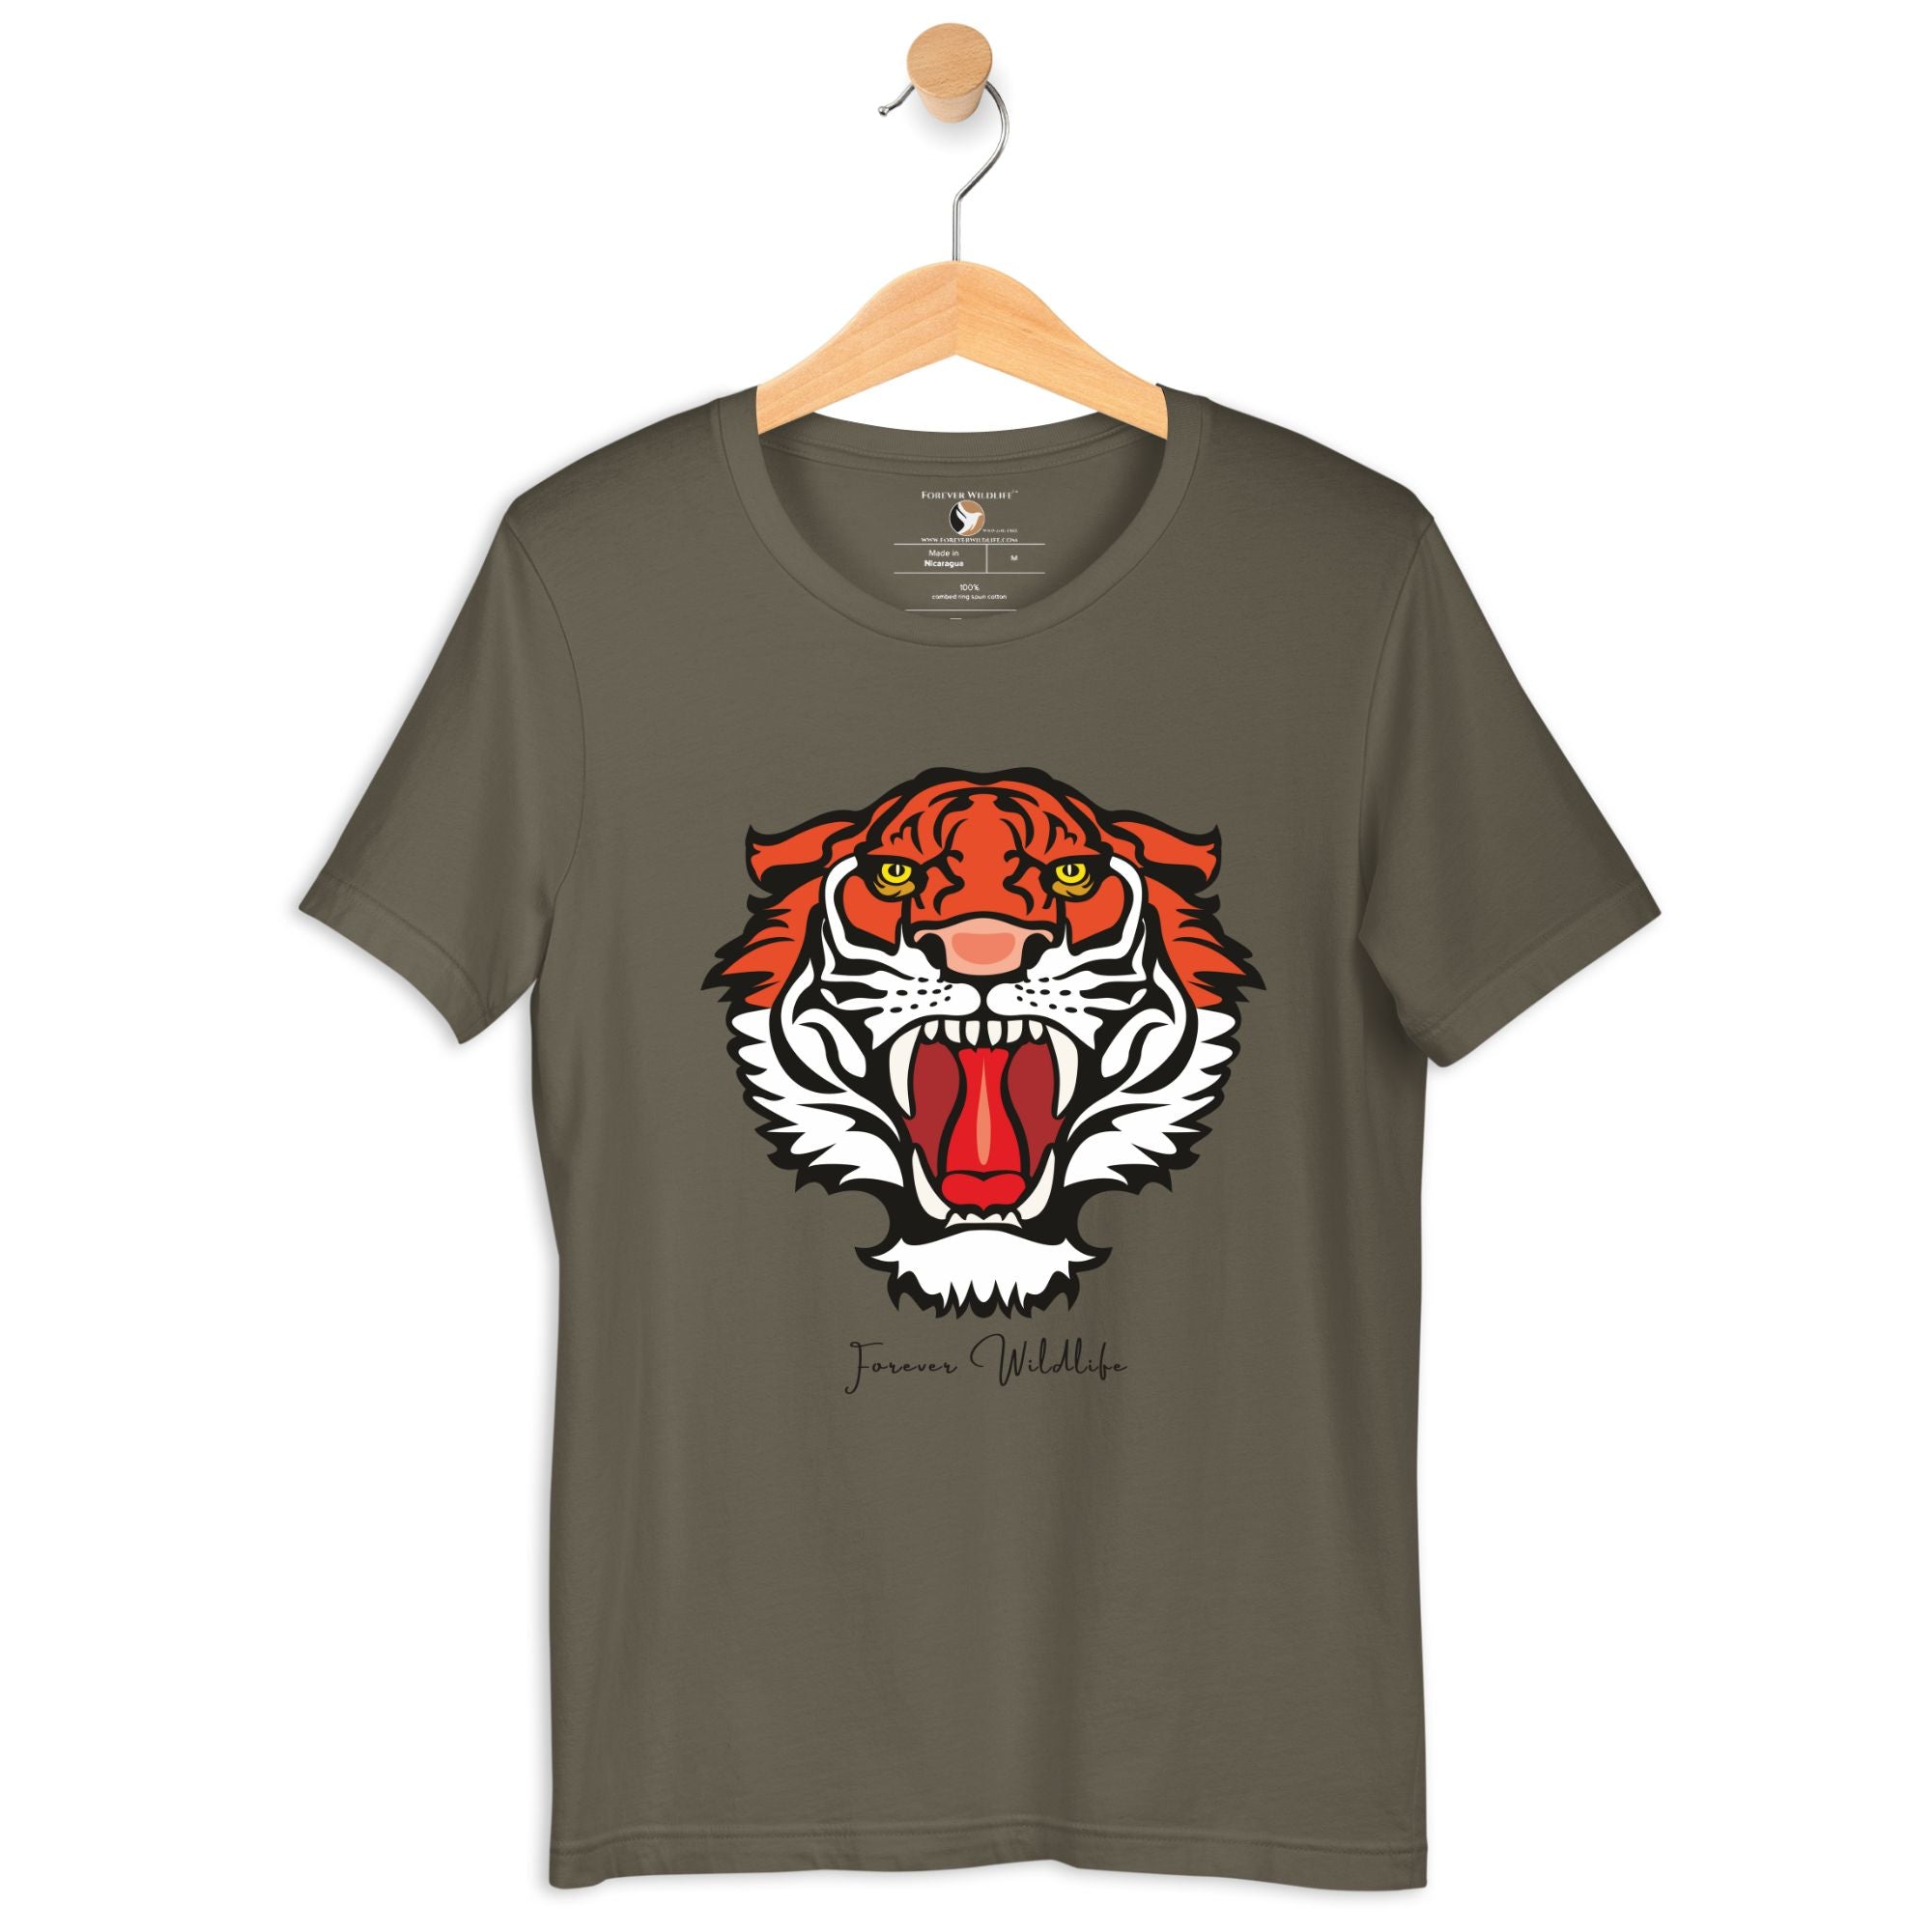 Tiger T-Shirt in Army – Premium Wildlife T-Shirt Design, Wildlife Clothing & Apparel from Forever Wildlife